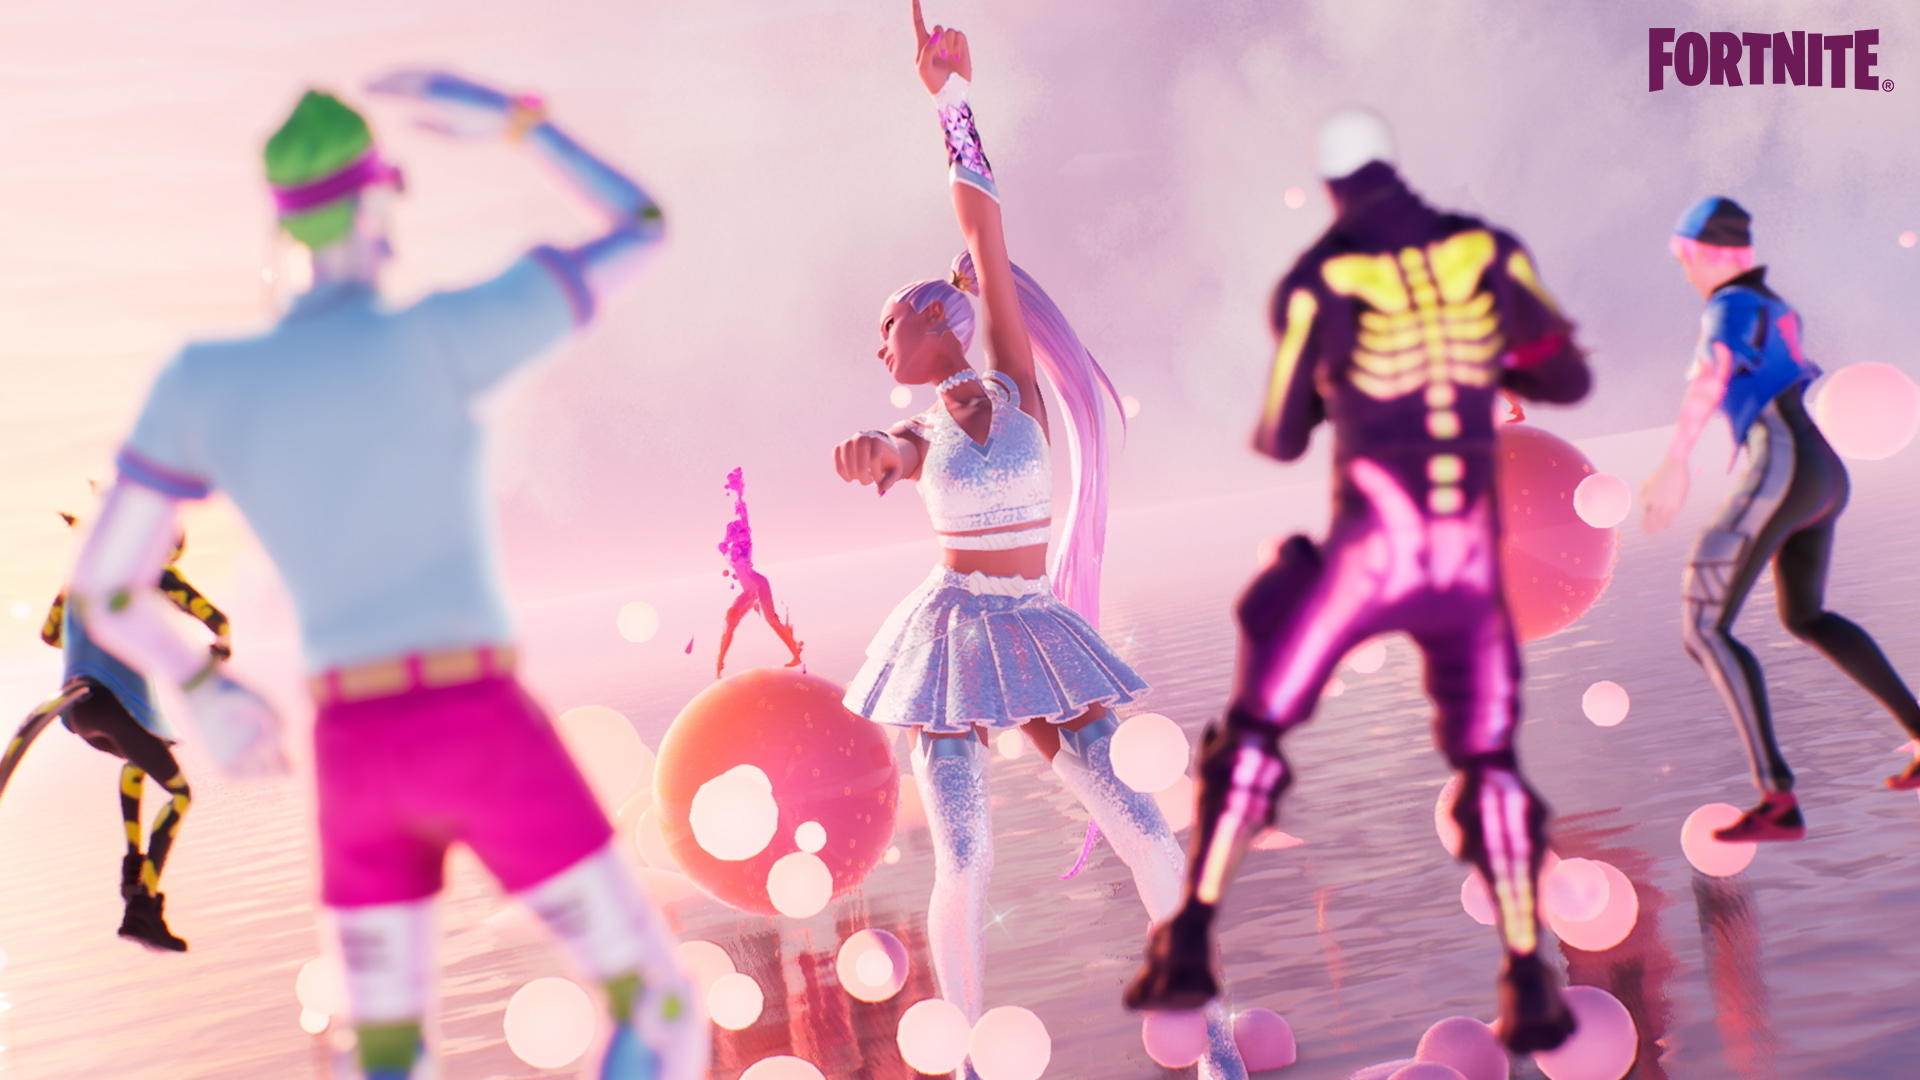 Fortnite Rift Tour nominated for 'Best Metaverse Performance' at MTV Video Music Awards 2022